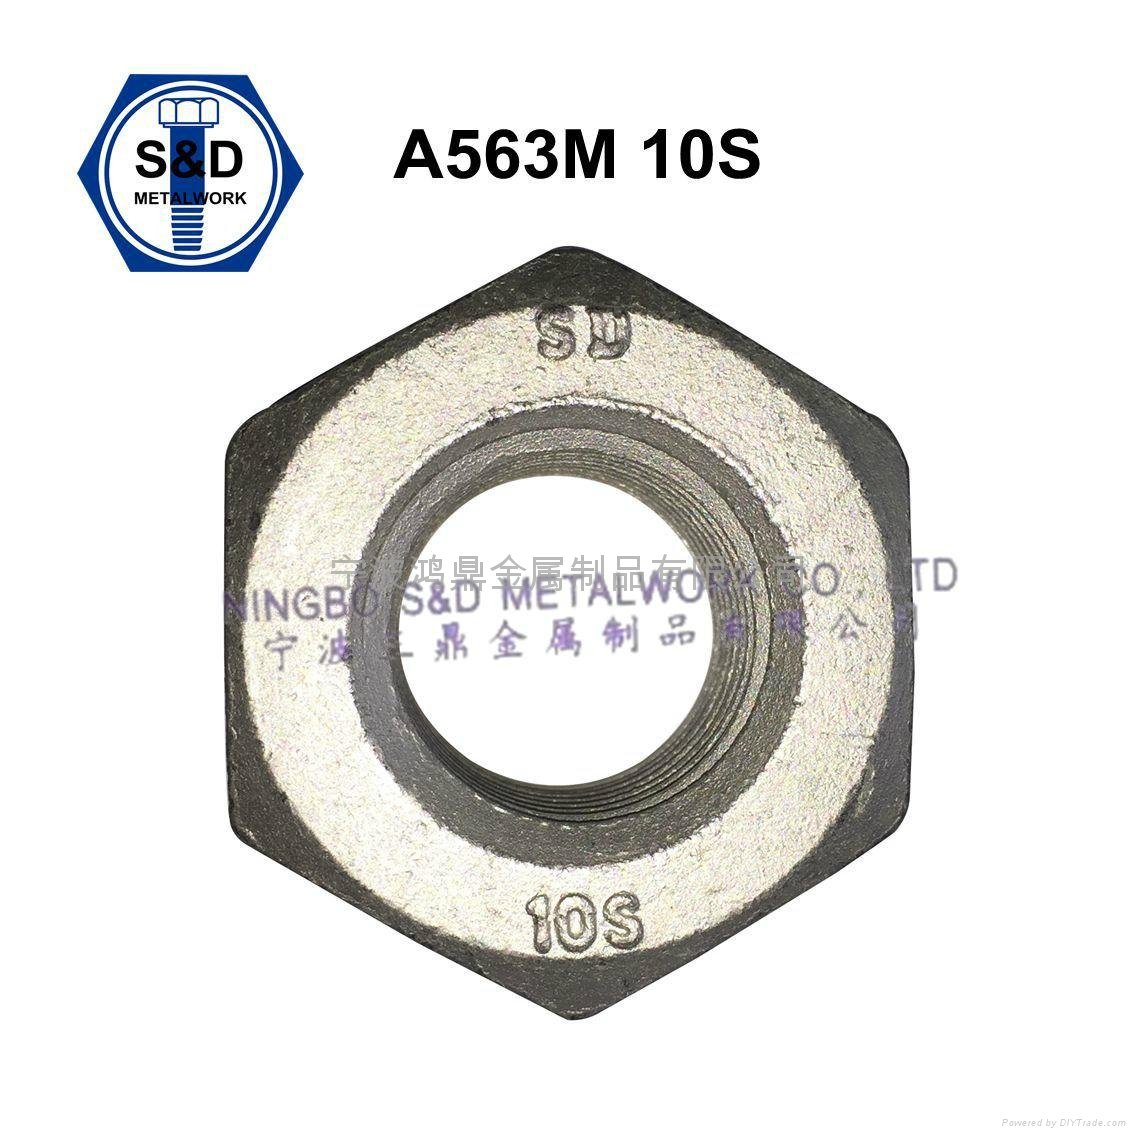 Heavy Hex Structural Nut ASTM A563M